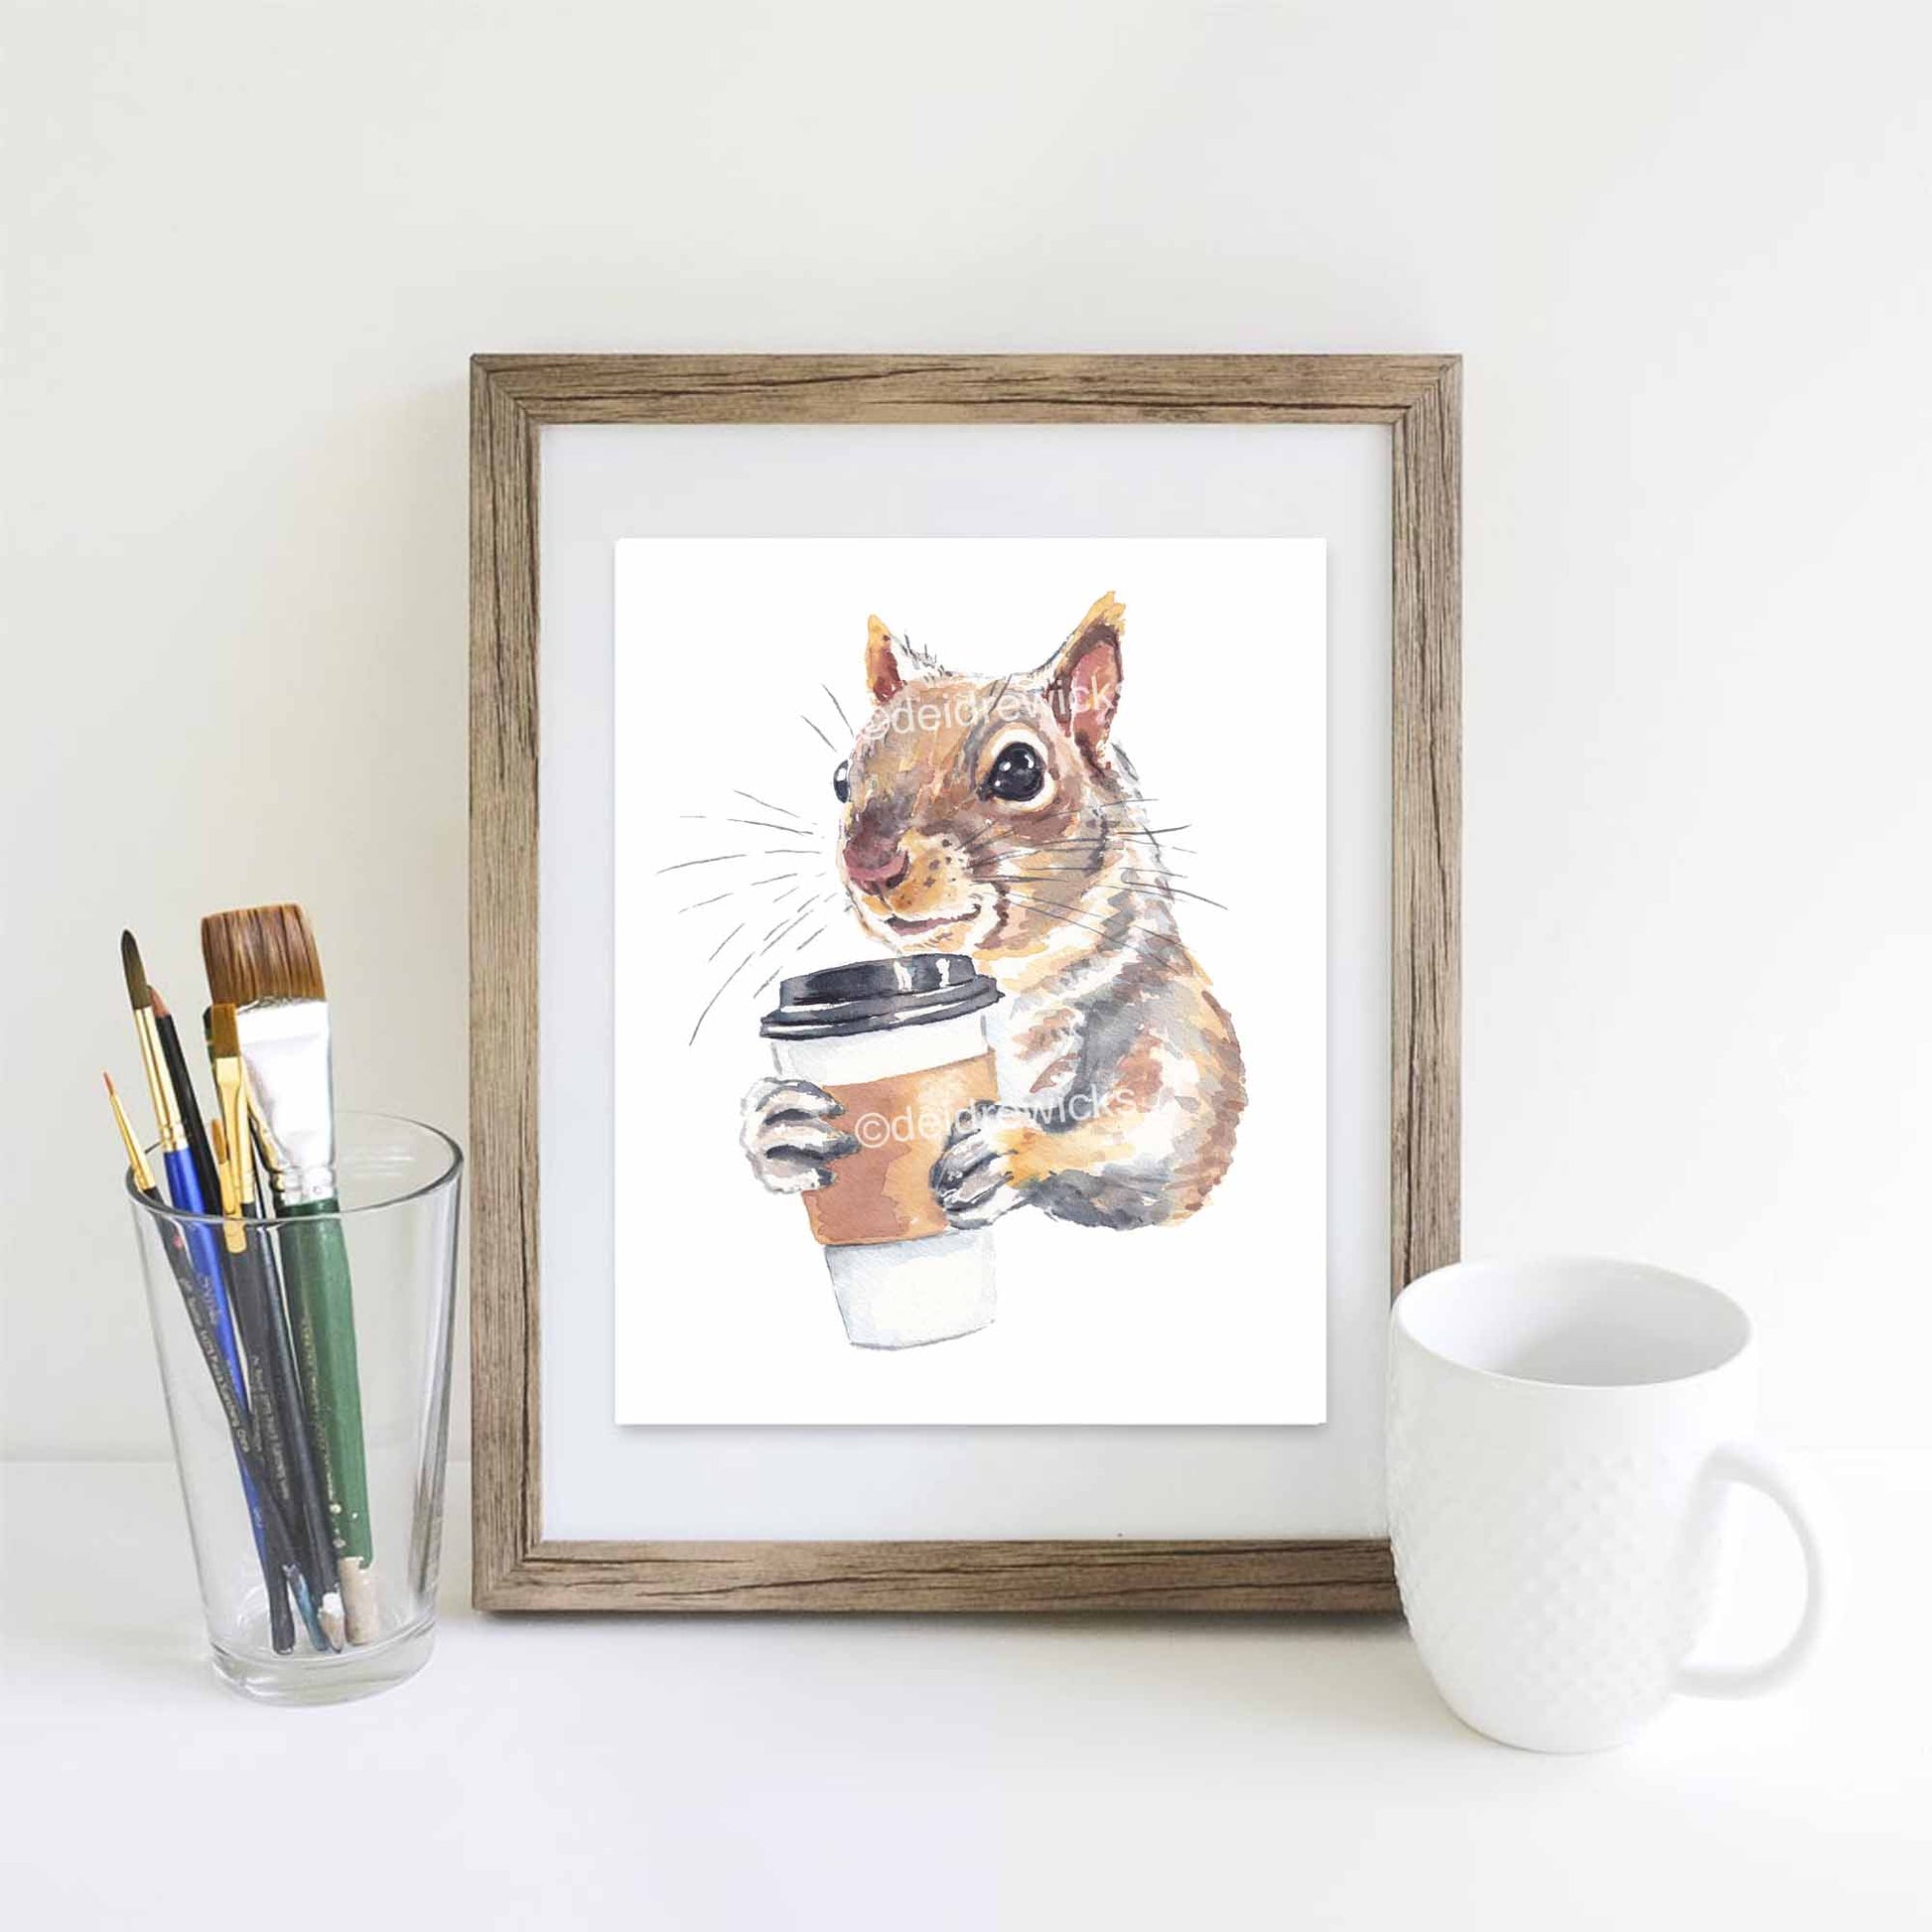 Framed example of a squirrel watercolour painting by Deidre Wicks